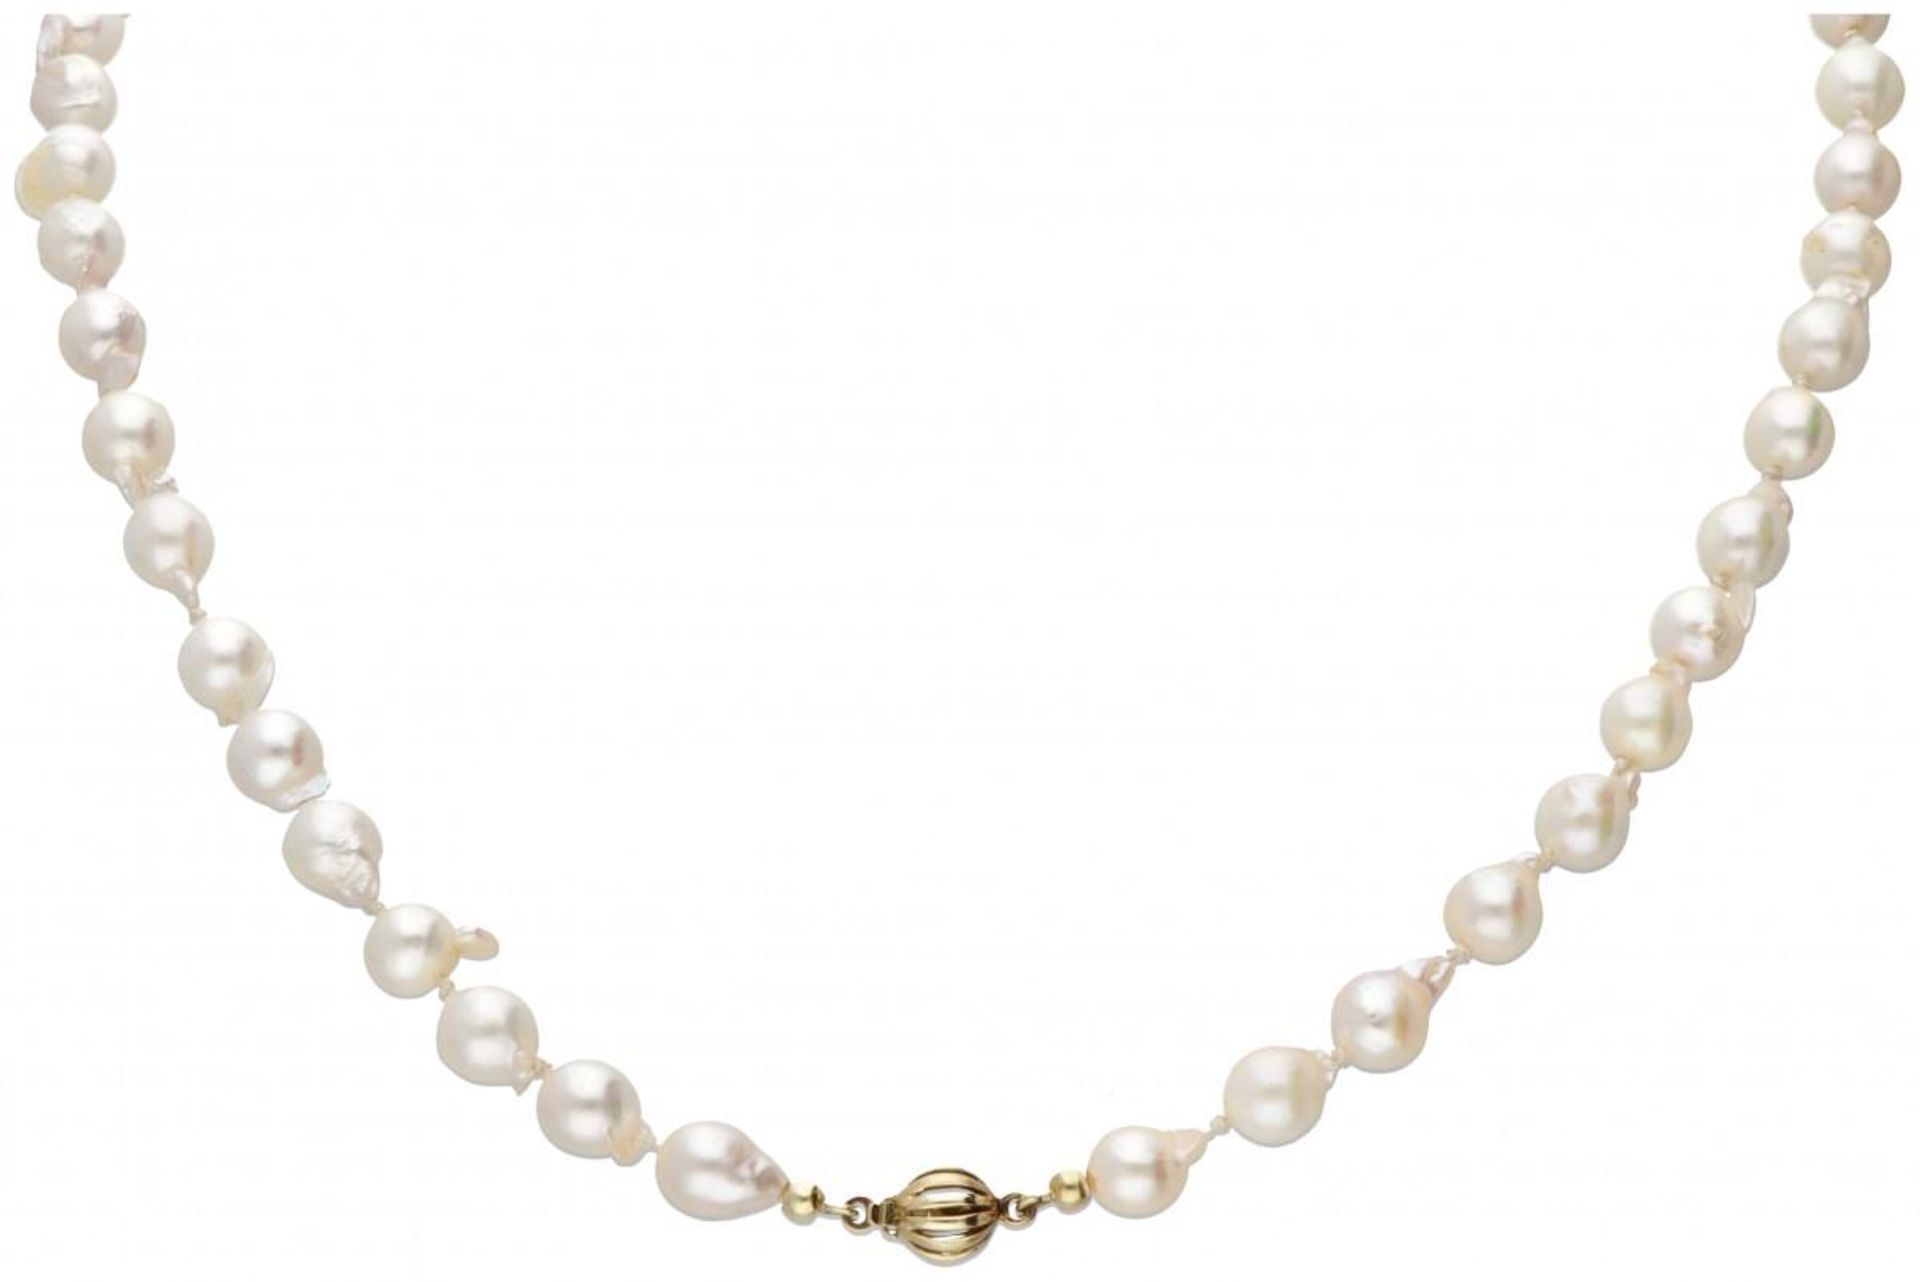 Freshwater pearl necklace with a 14K. yellow gold closure.